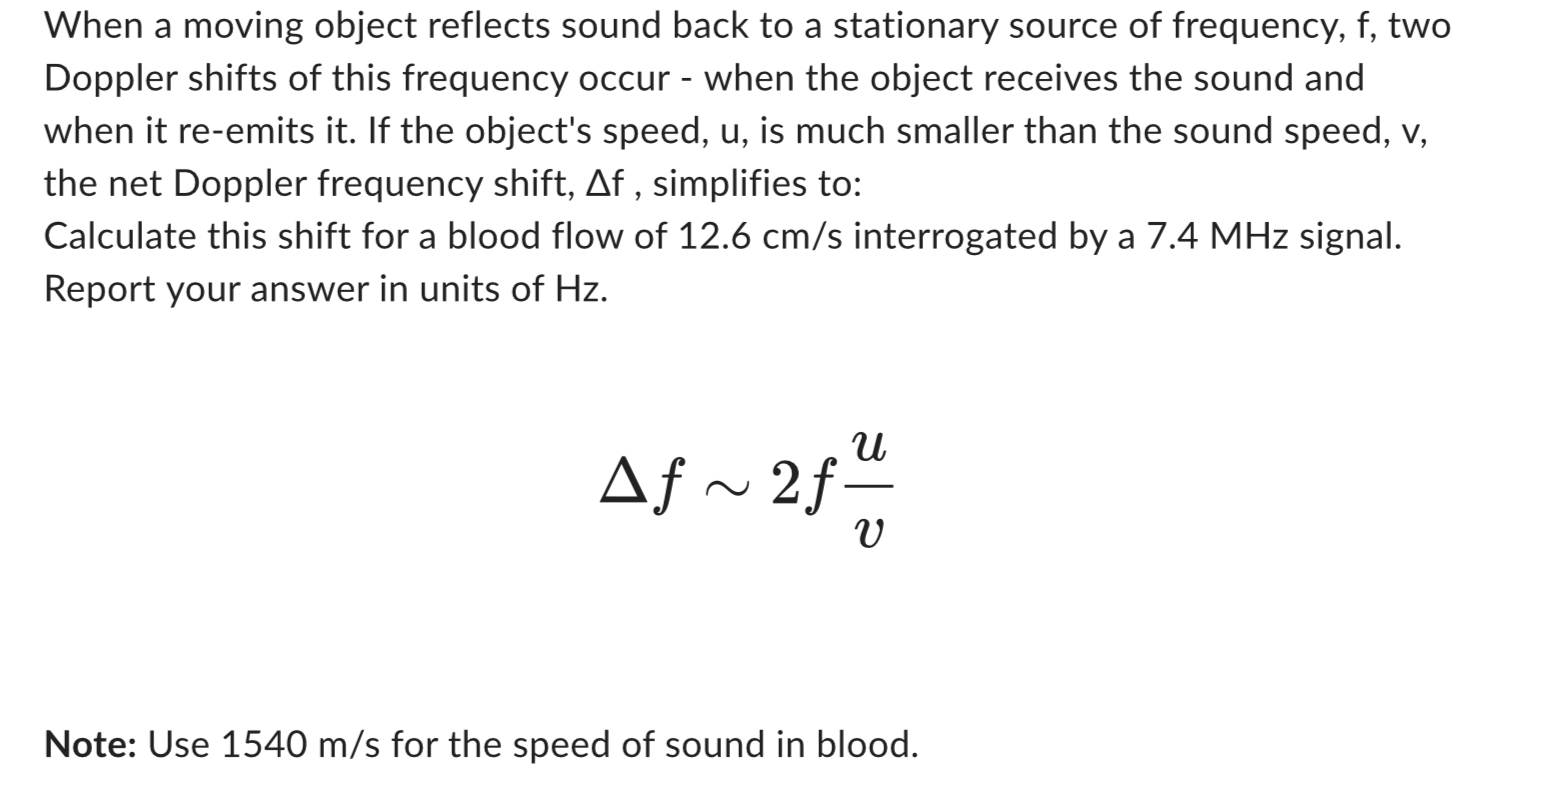 When a moving object reflects sound back to a stationary source of frequency, f, two Doppler shifts of this